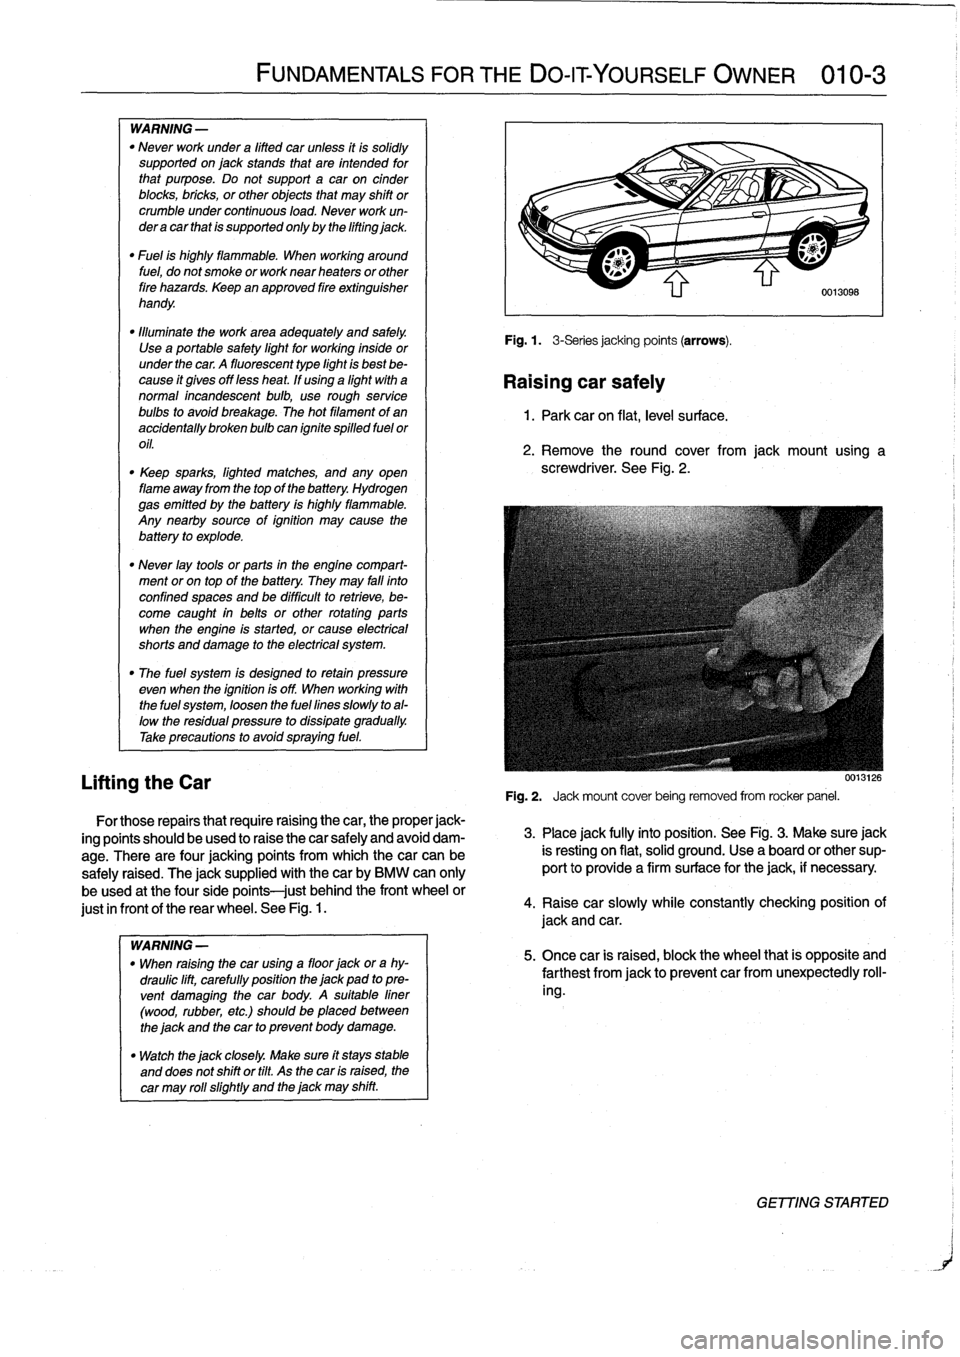 BMW M3 1996 E36 Workshop Manual 
WARNING
-

"
Never
work
under
a
lifted
car
unless
it
is
solidly
supported
on
jack
stands
that
are
intended
for
that
purpose
.
Do
not
support
a
car
on
cinder
blocks,
bricks,
or
other
objects
that
may
